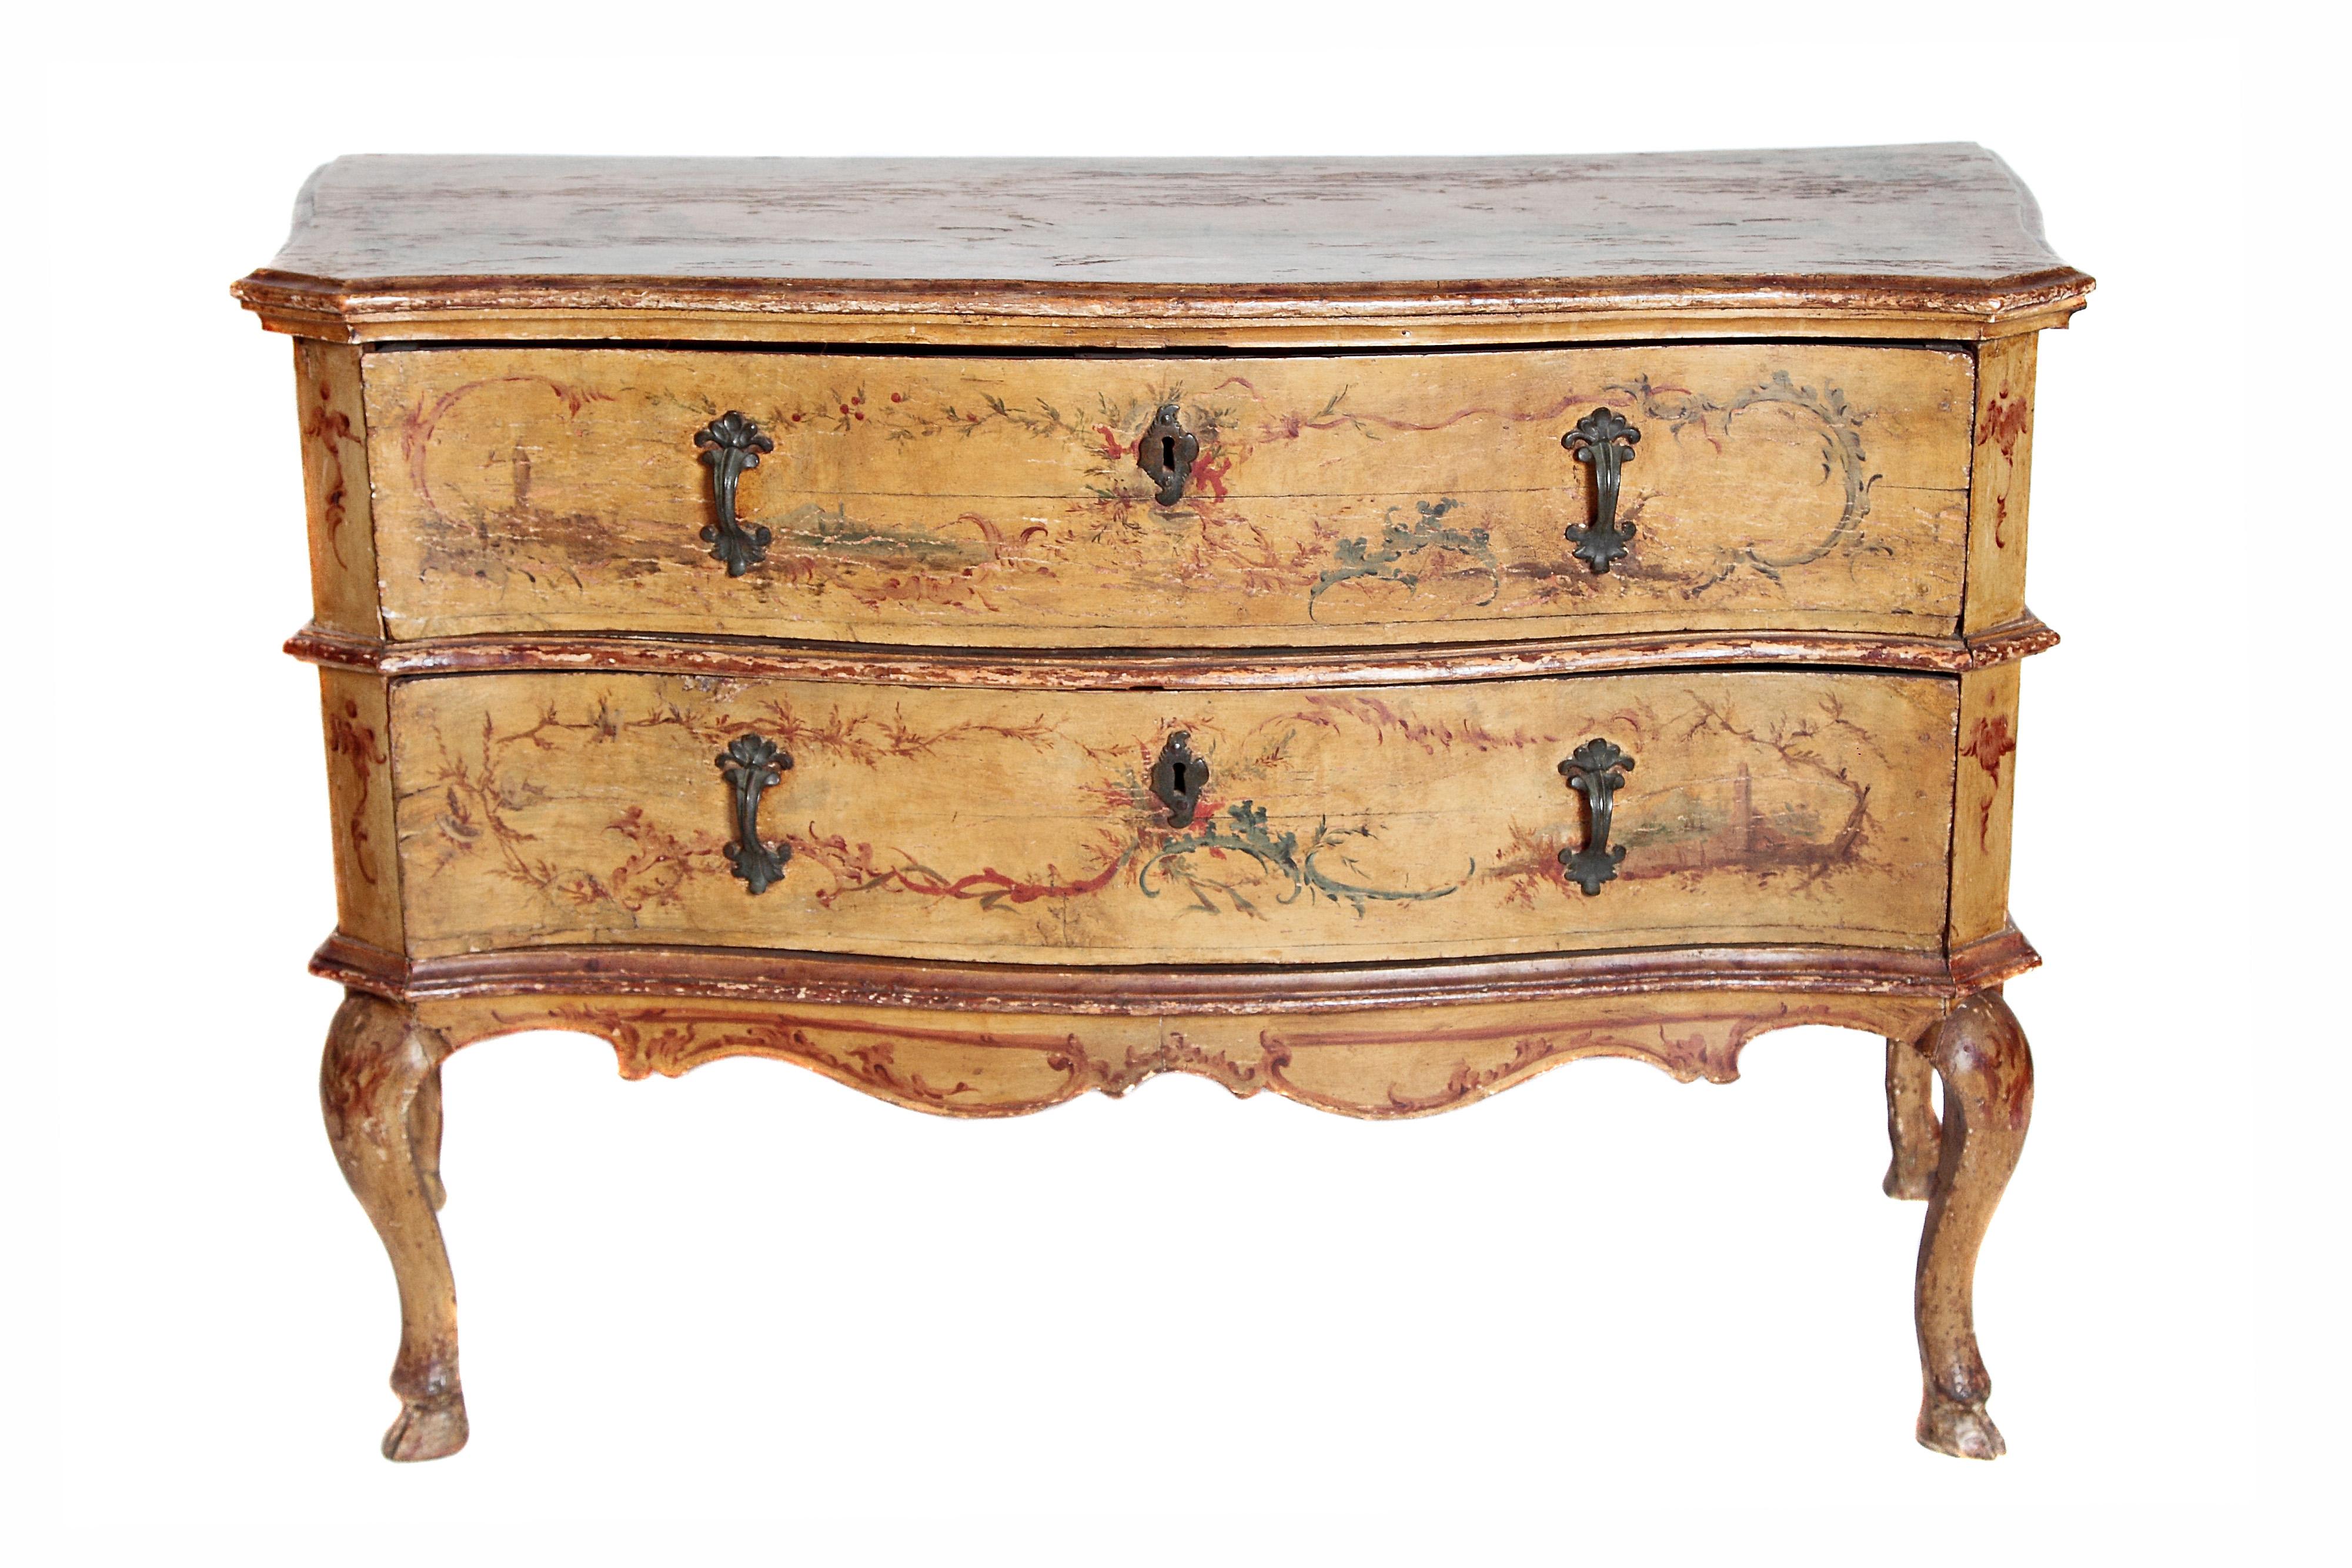 Neoclassical Mid-18th Century Italian Painted Two-Drawer Commode